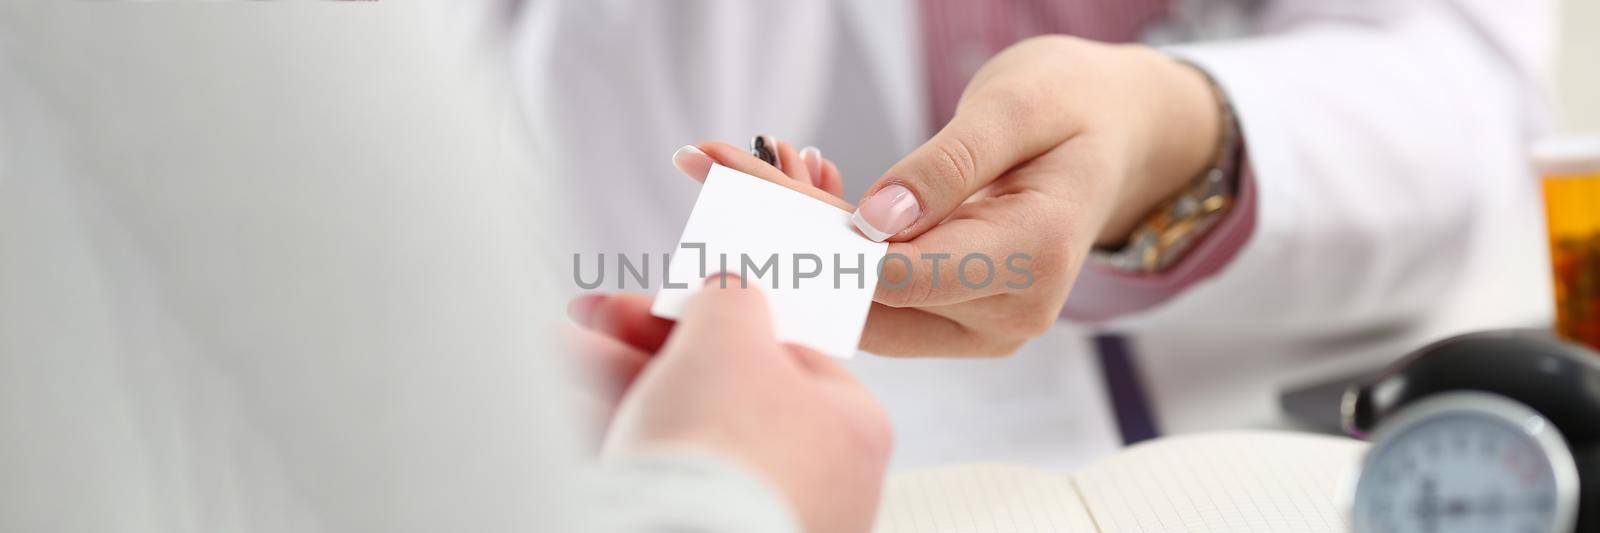 Female doctor hands over white business card to patient. Attending physician choice concept